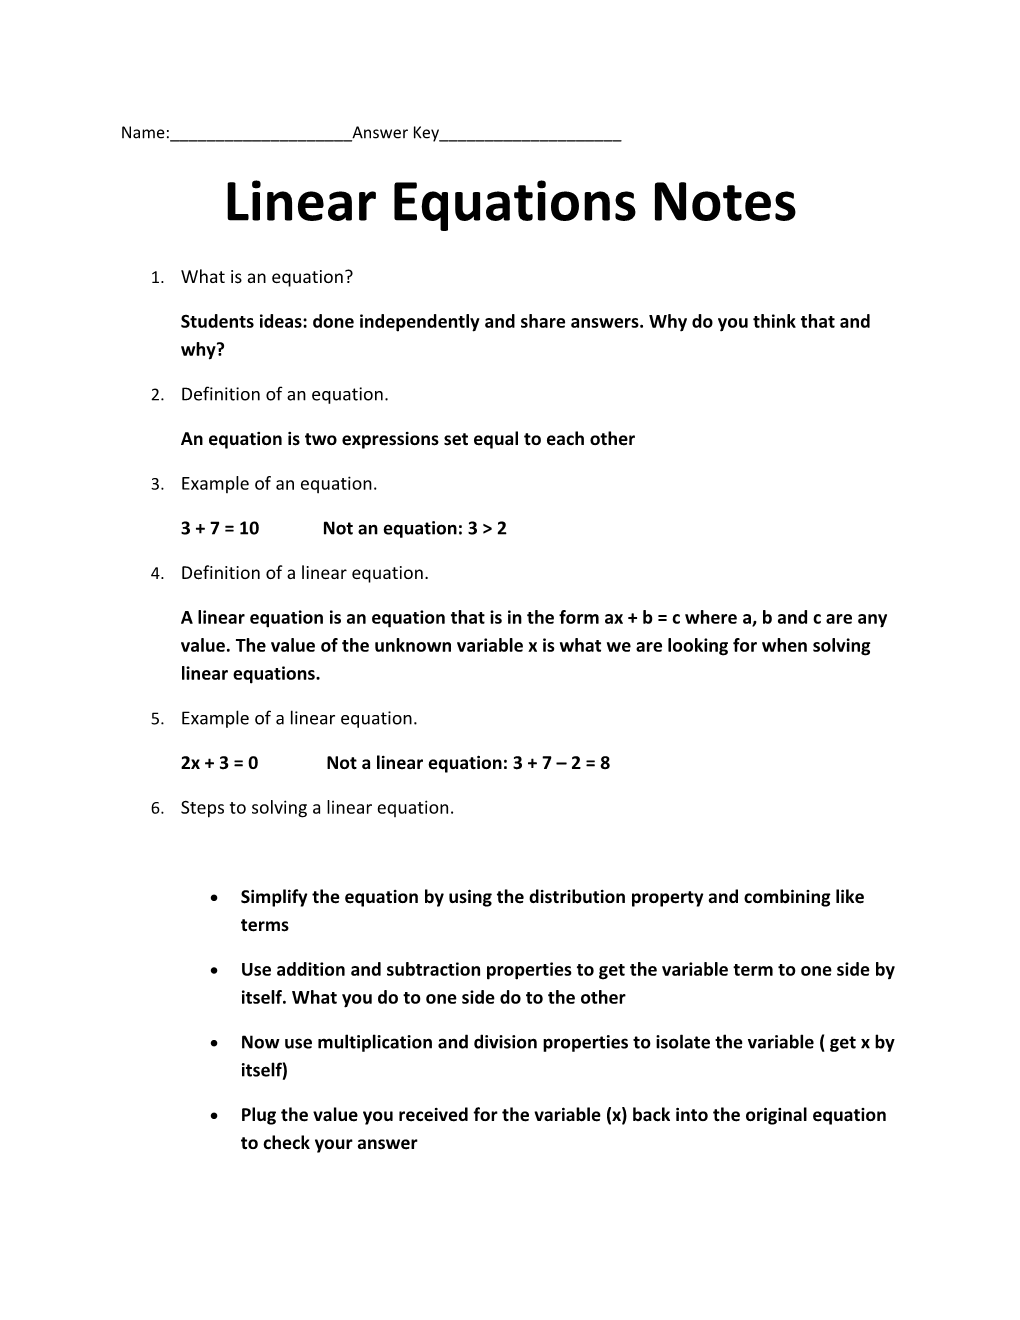 Linear Equations Notes